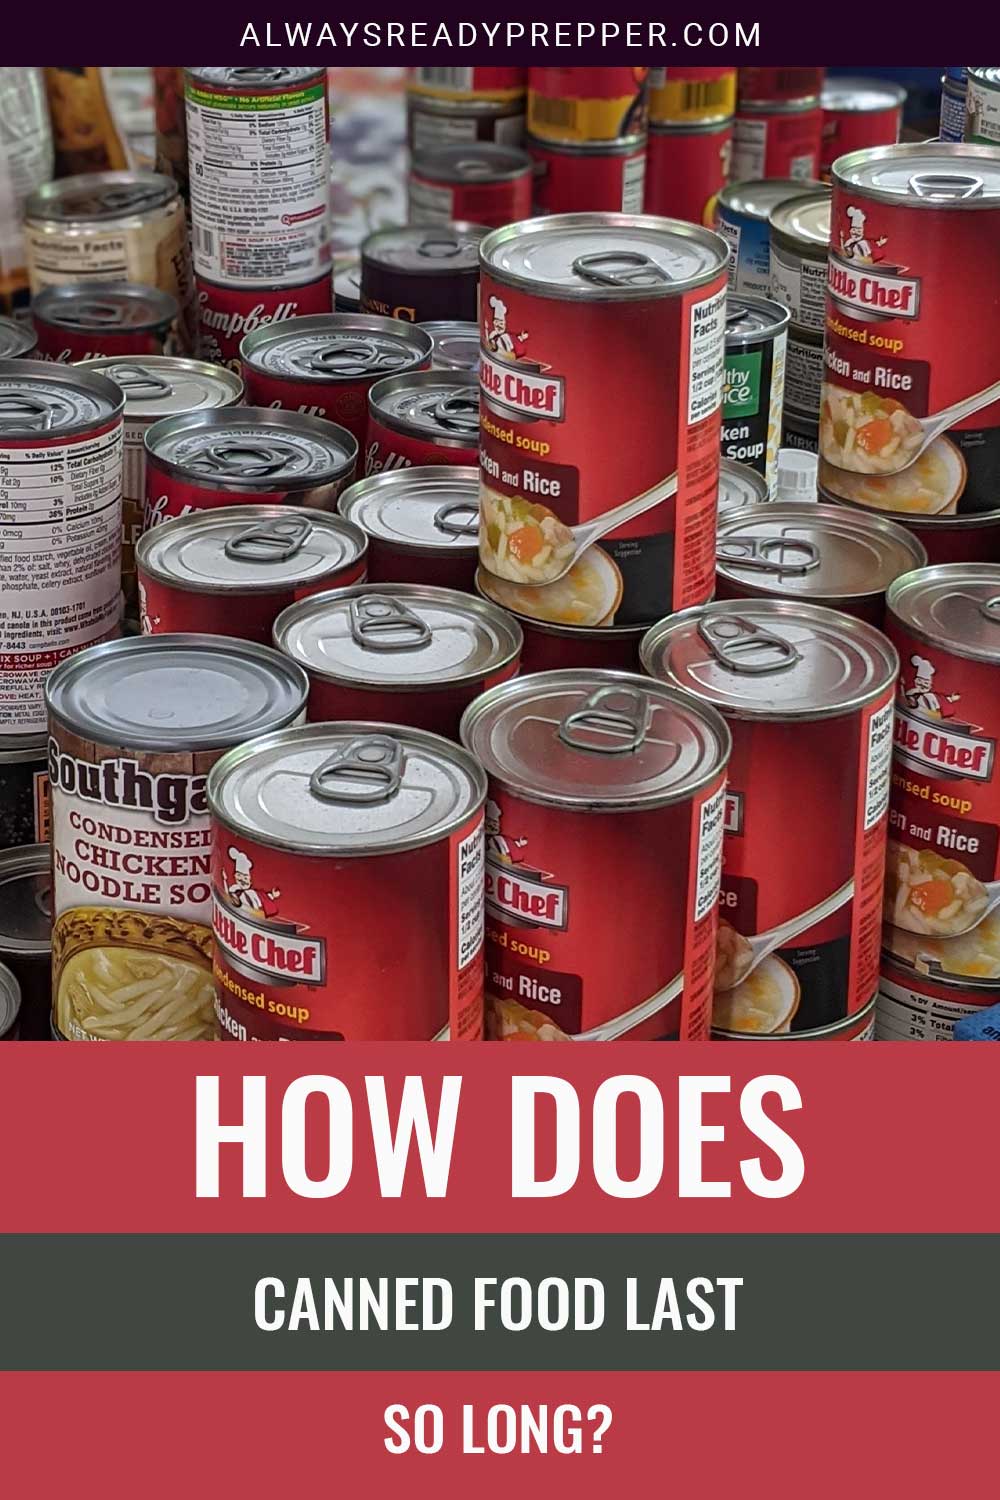 Bunch of canned food stacked - How Does Canned Food Last So Long?